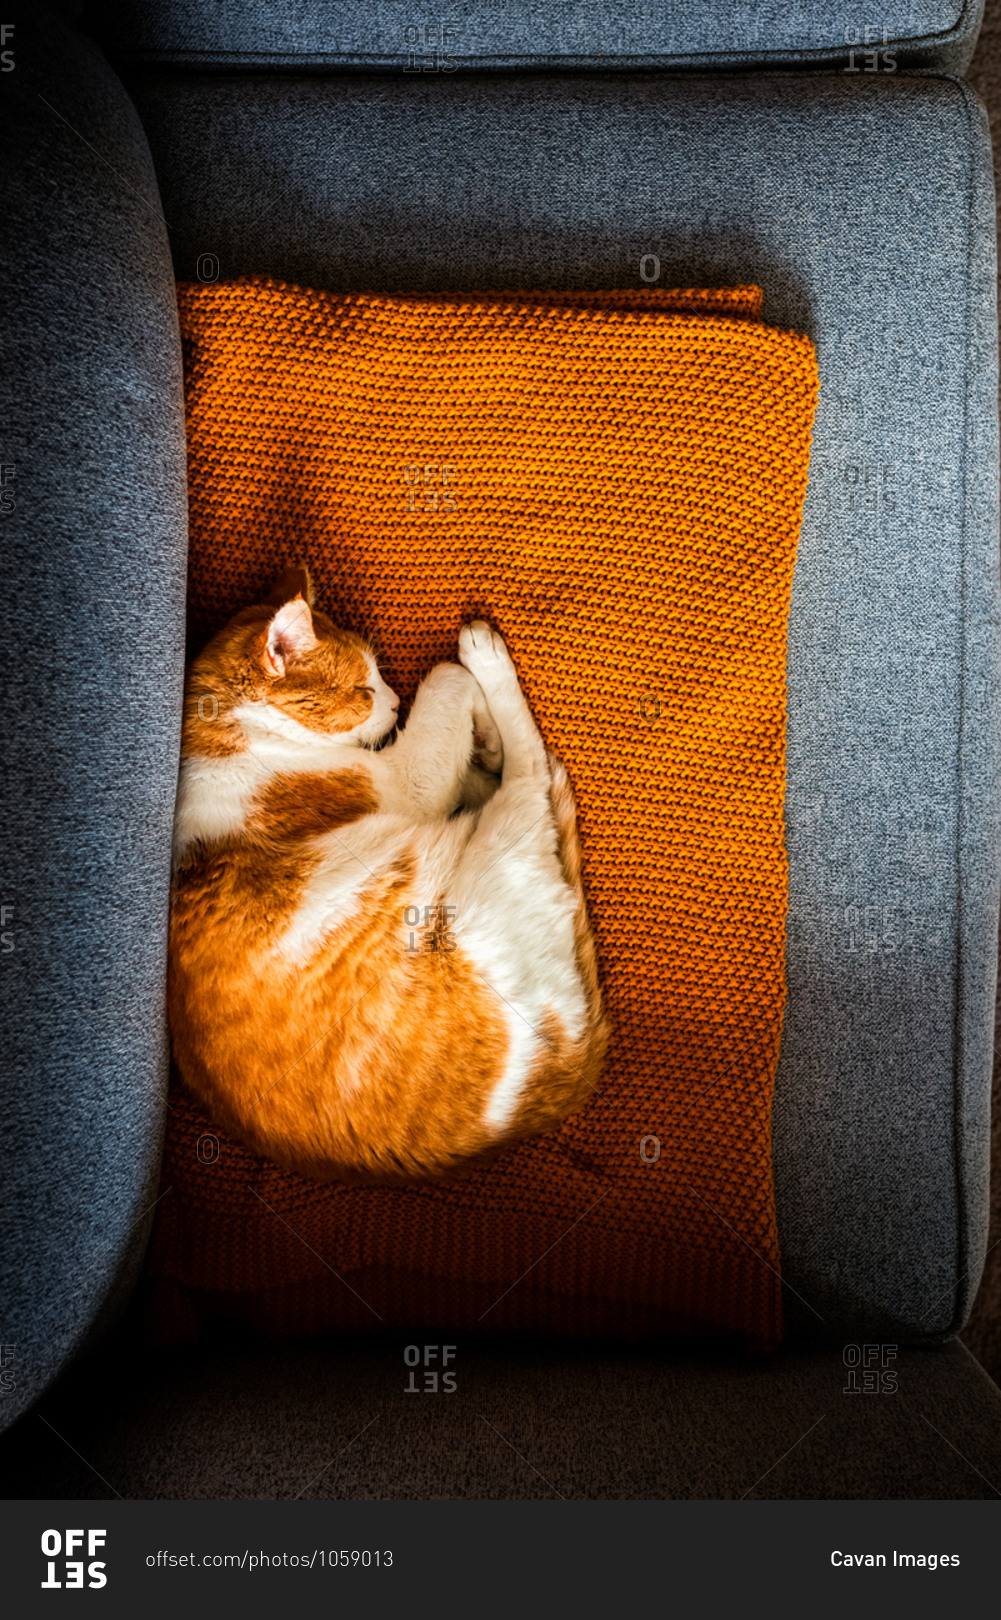 Orange and white cat sleeping on a blanket on a couch inside a house